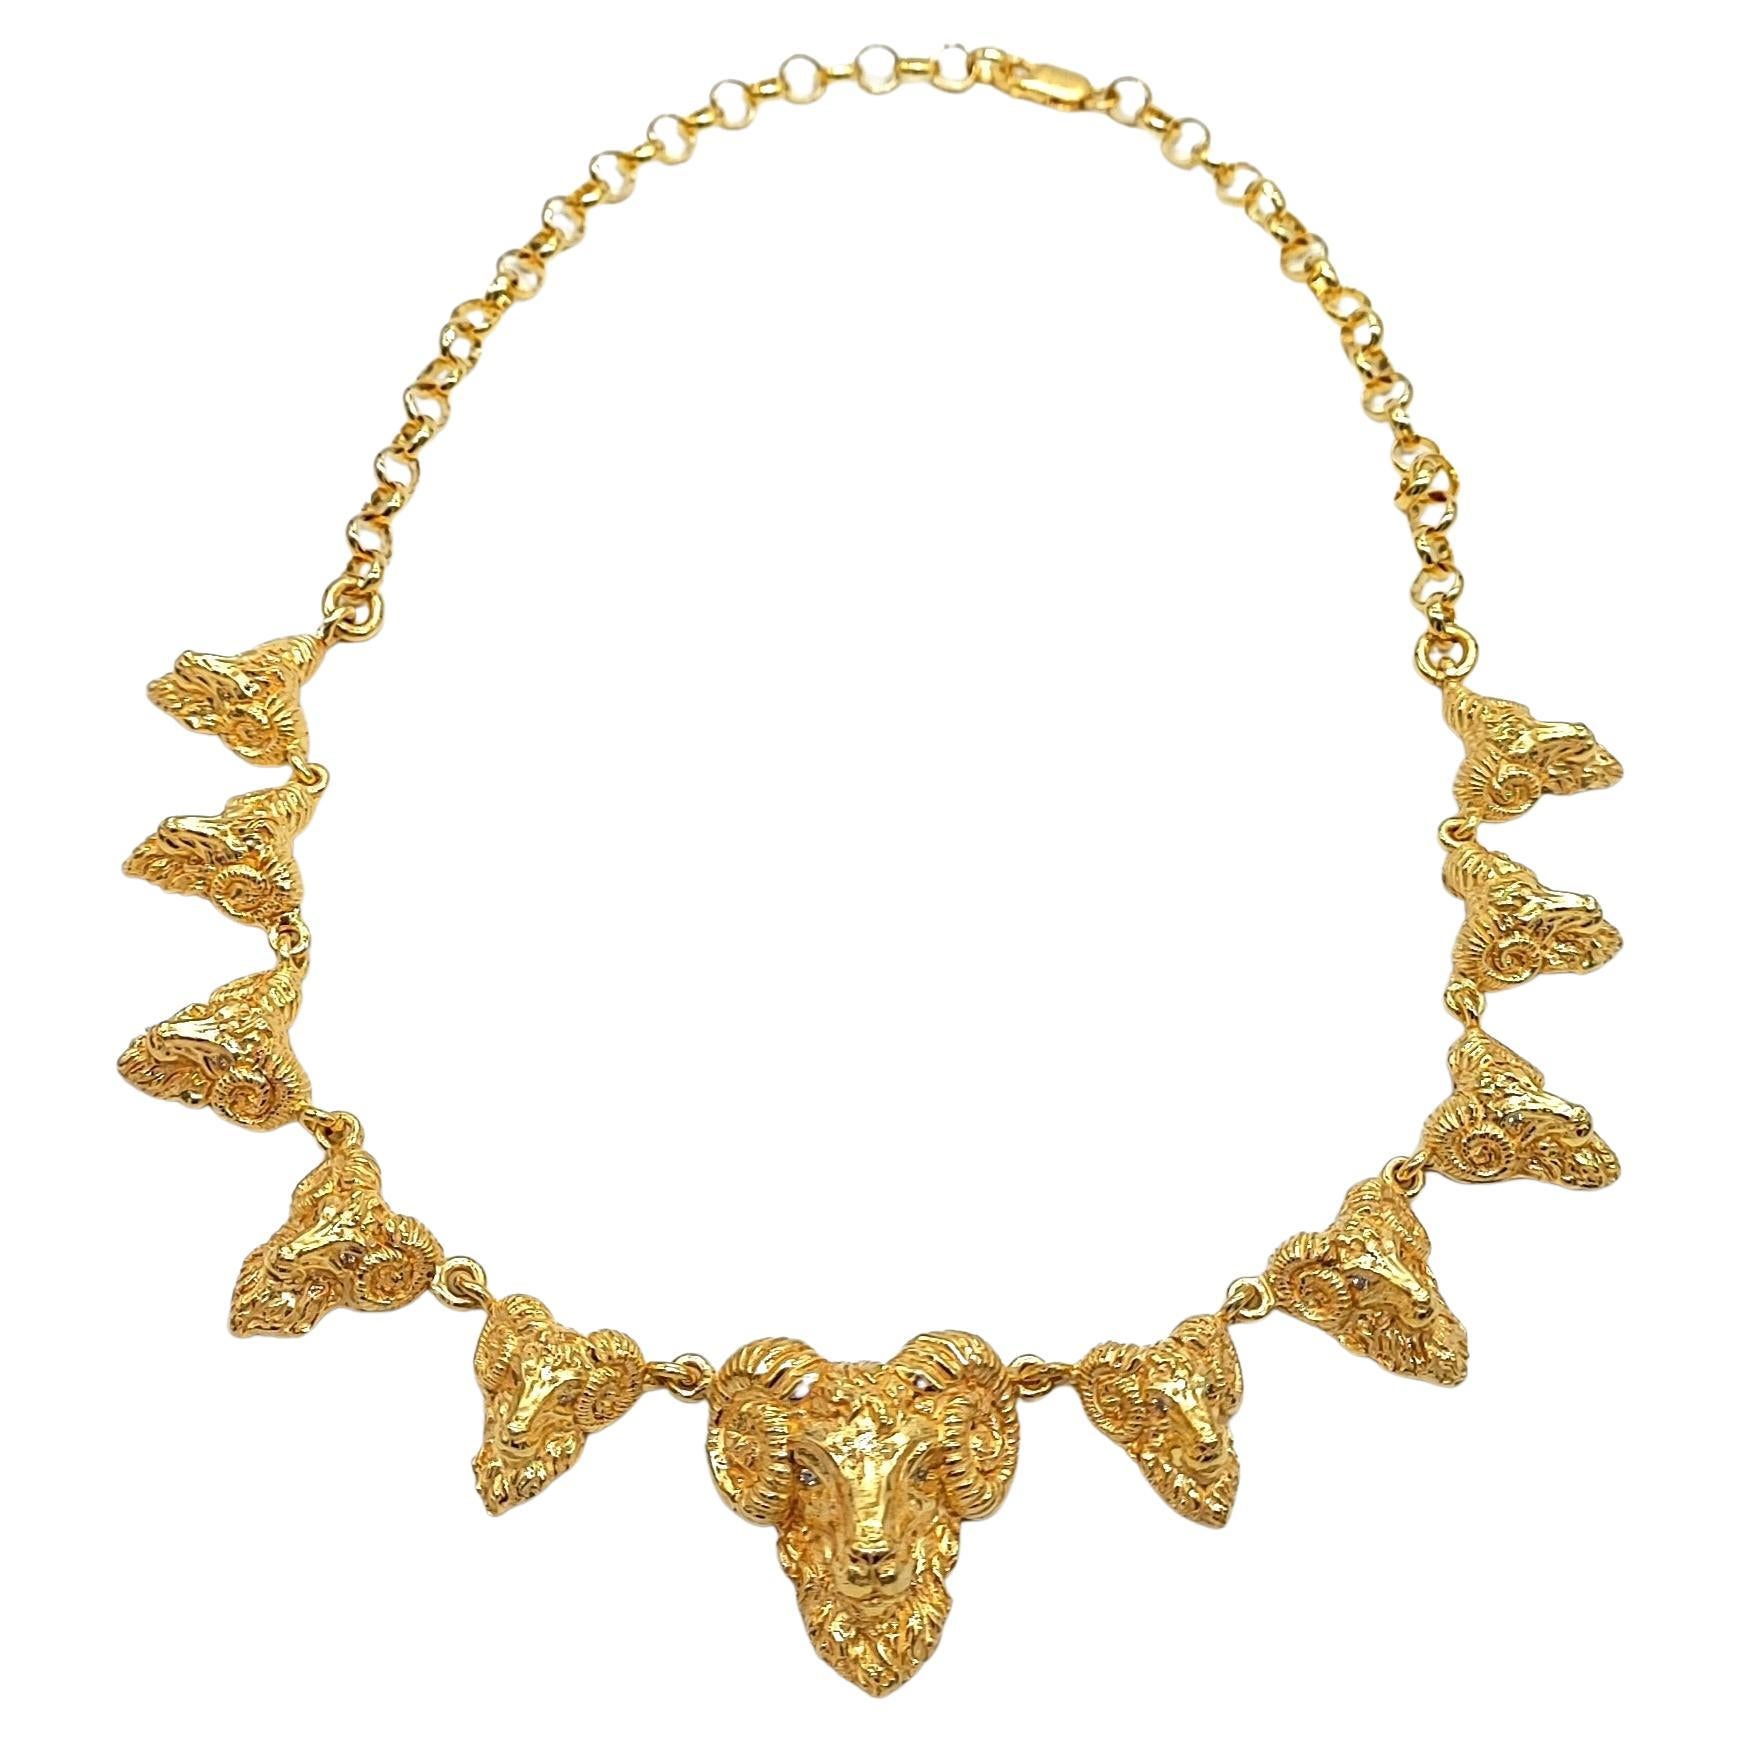 Aries Head 14 Karat Solid Gold Necklace with Diamonds